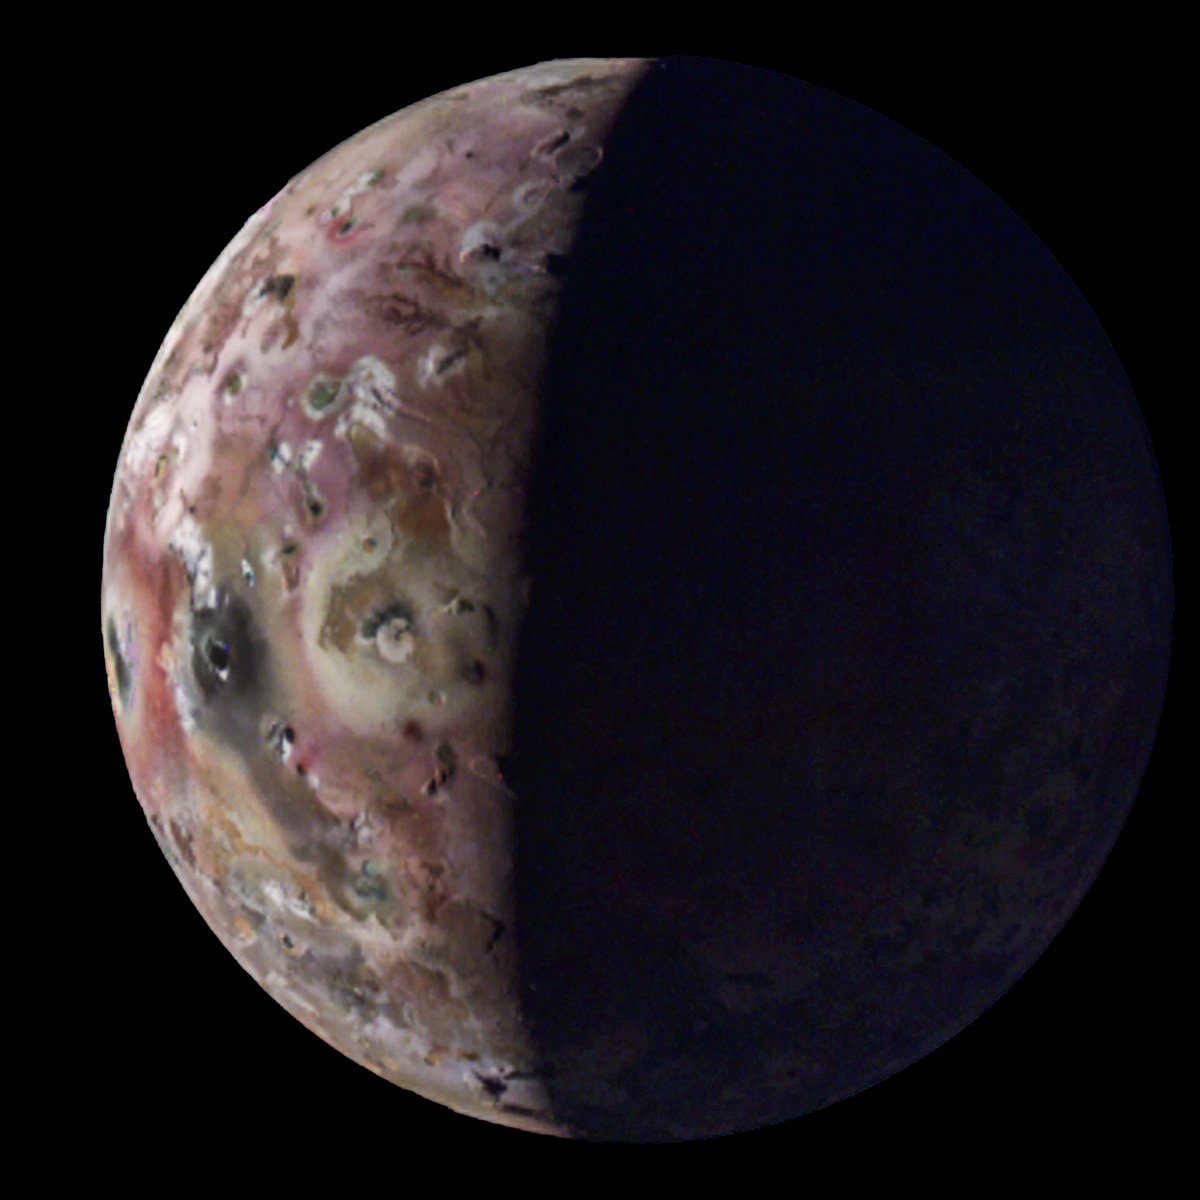 #JunoMission is preparing for its next close encounter with Jupiter this weekend.

This image, taken during a close flyby of Jupiter's volcanic moon Io on April 9, shows the first-ever views of the moon's south polar region. go.nasa.gov/3UzJYyg